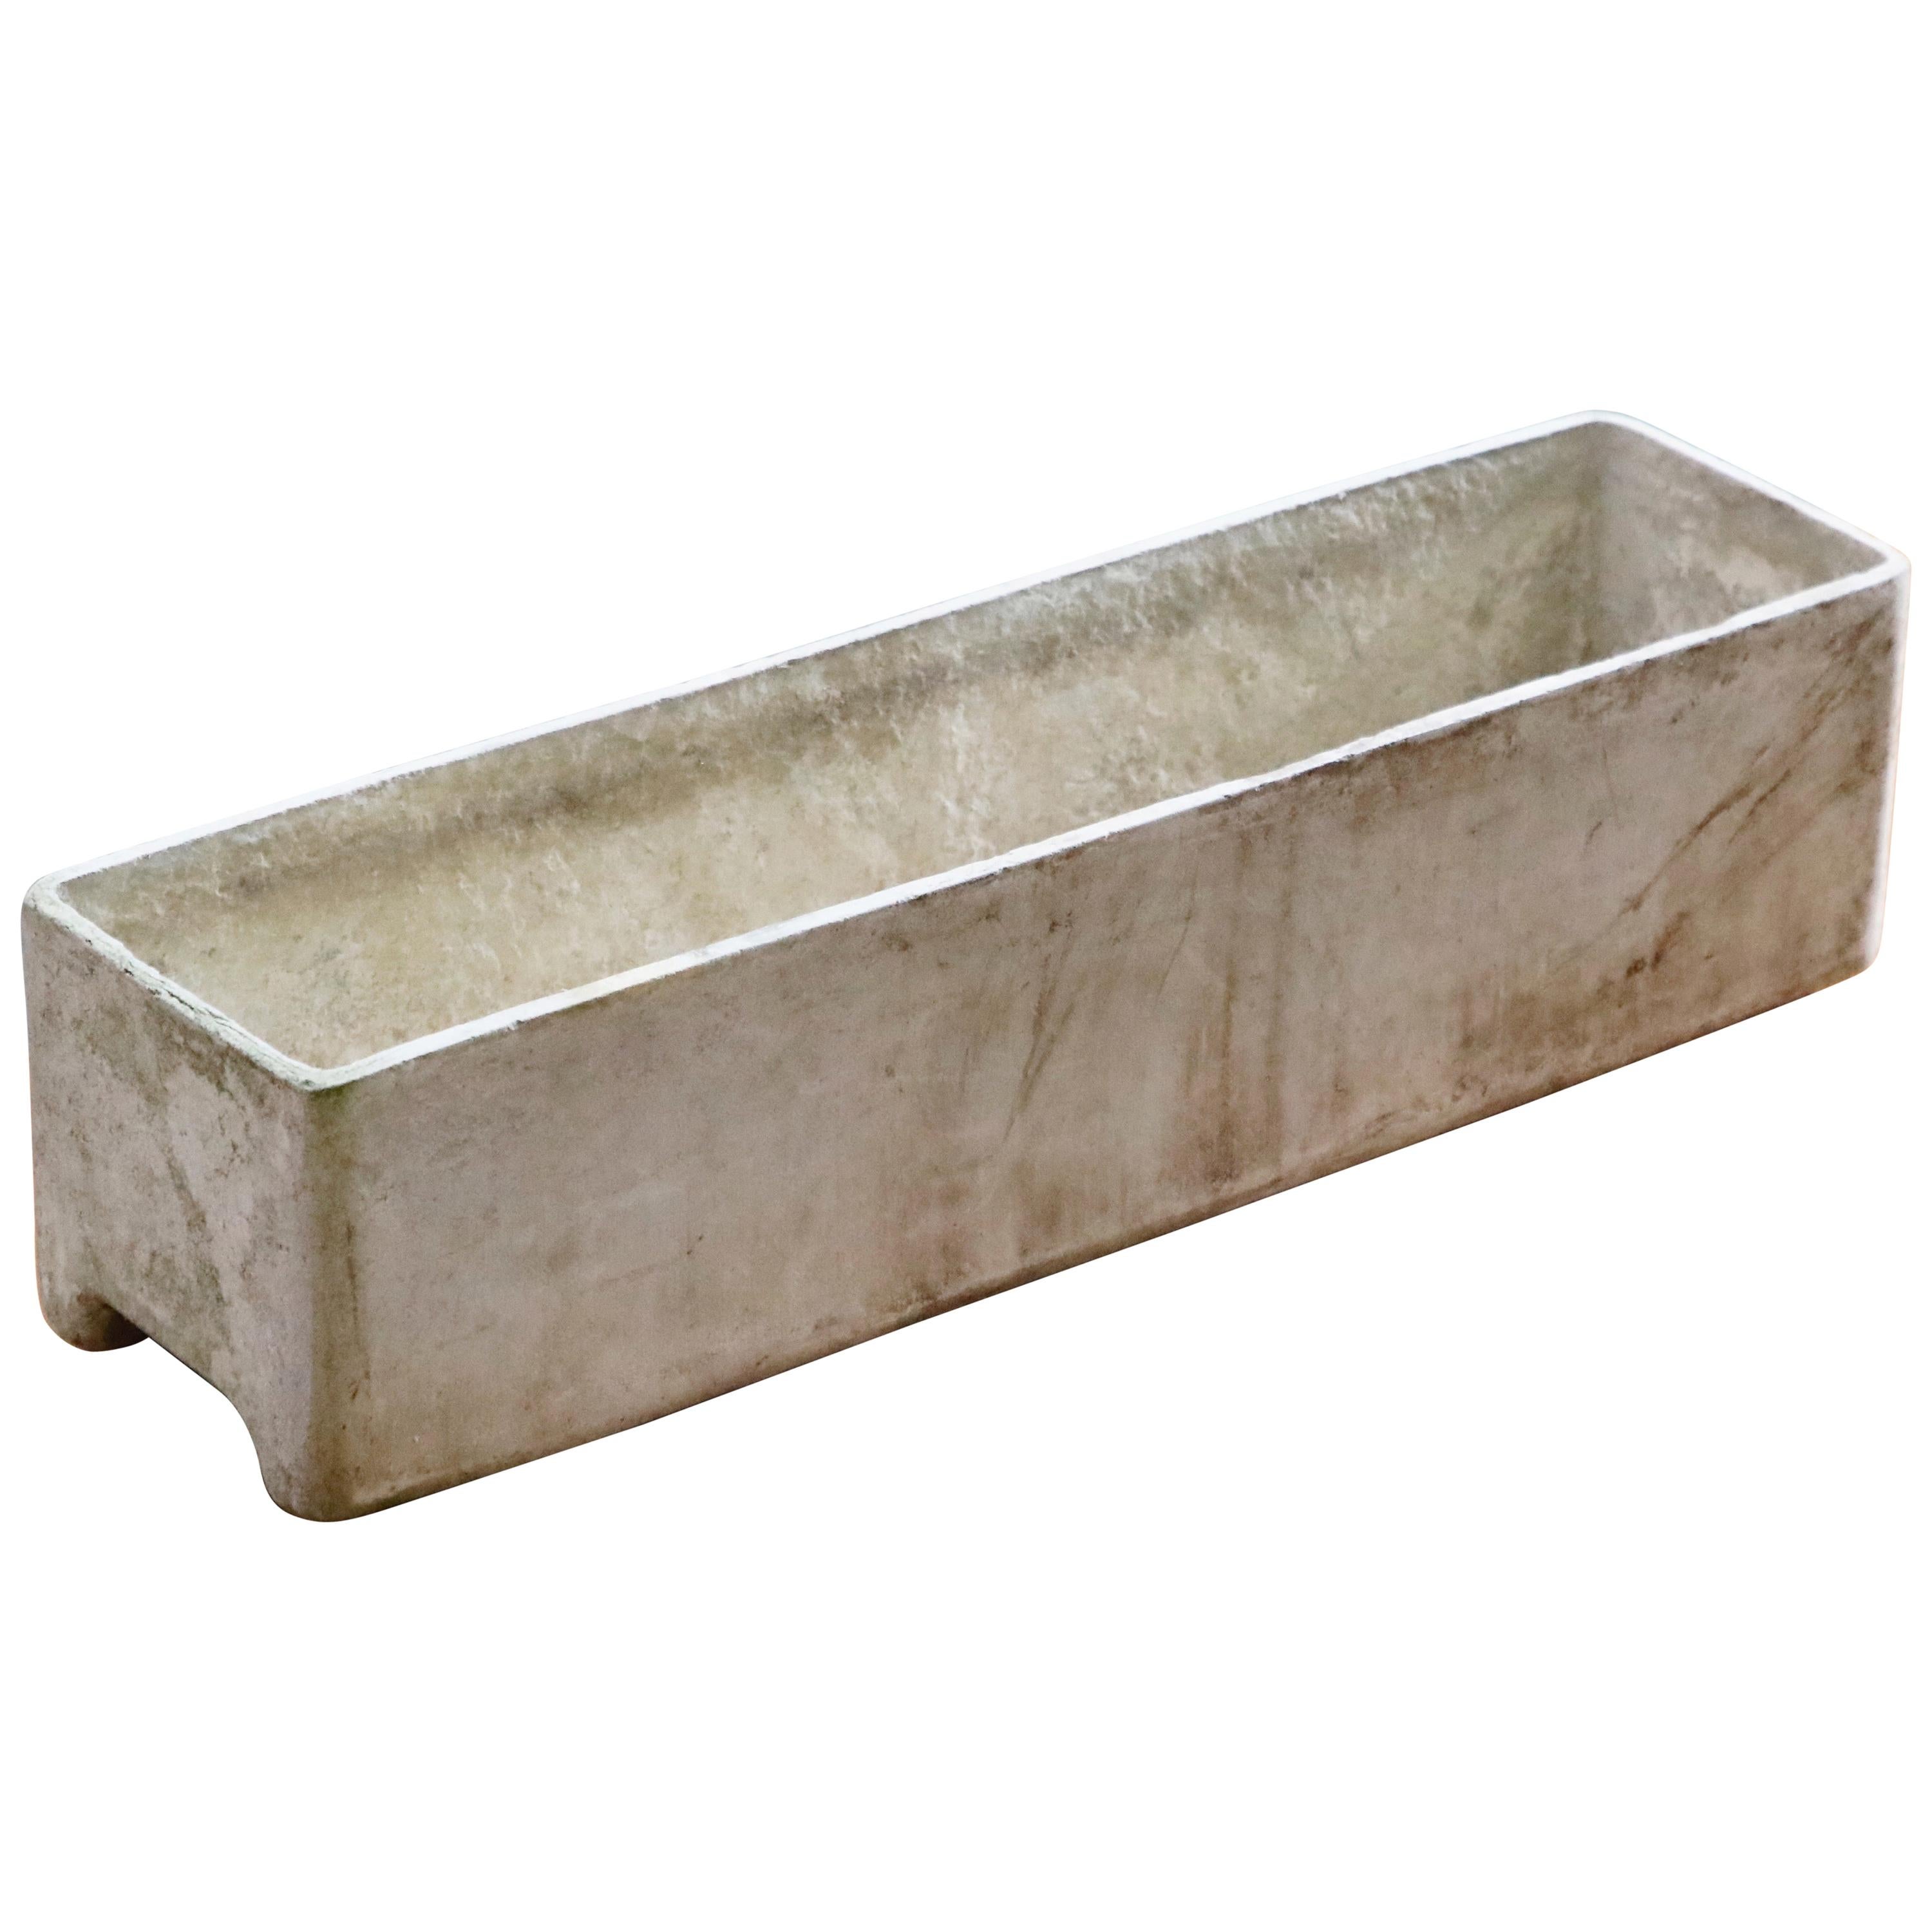 Willy Guhl for Eternit Rectangle Concrete Outdoor Planter, 1970s, Signed